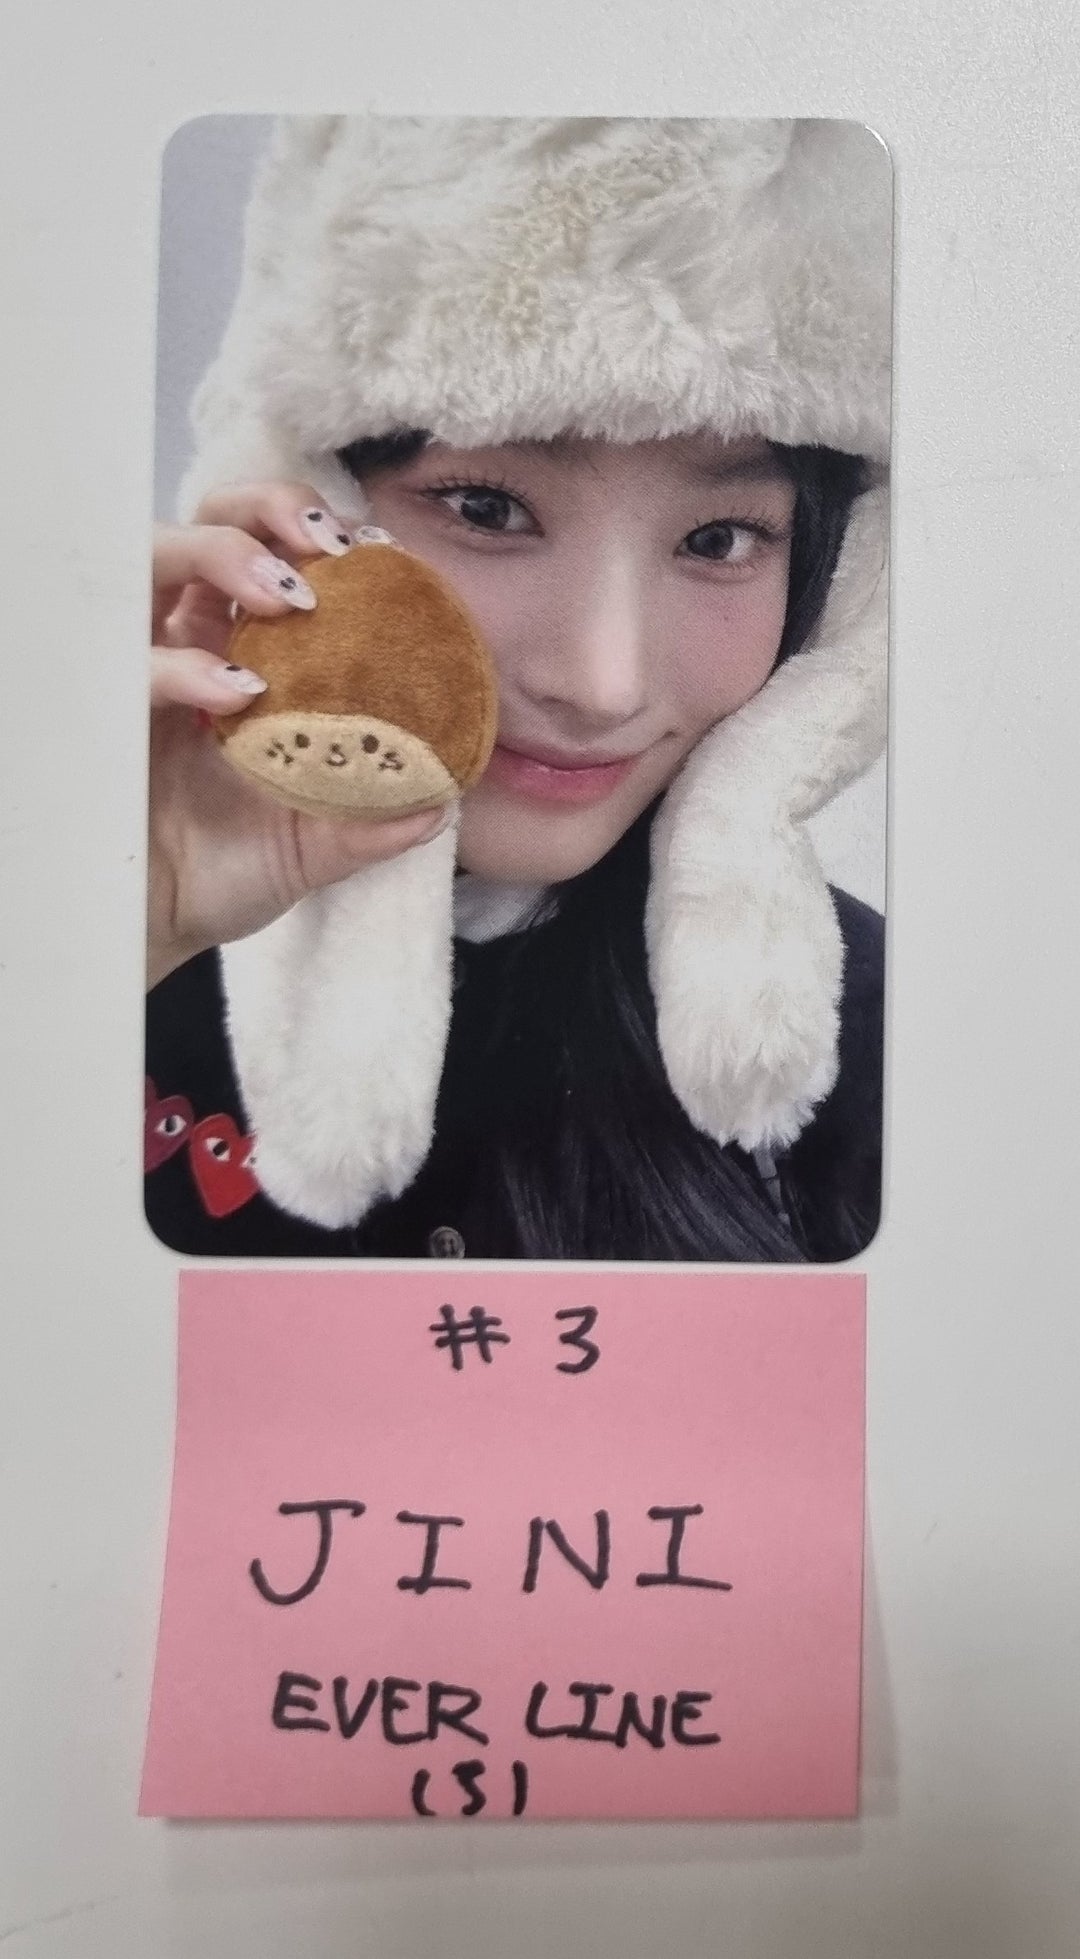 JINI "An Iron Hand In A Velvet Glove" - Everline Lucky Draw Event Photocard Round 2 [24.1.11]